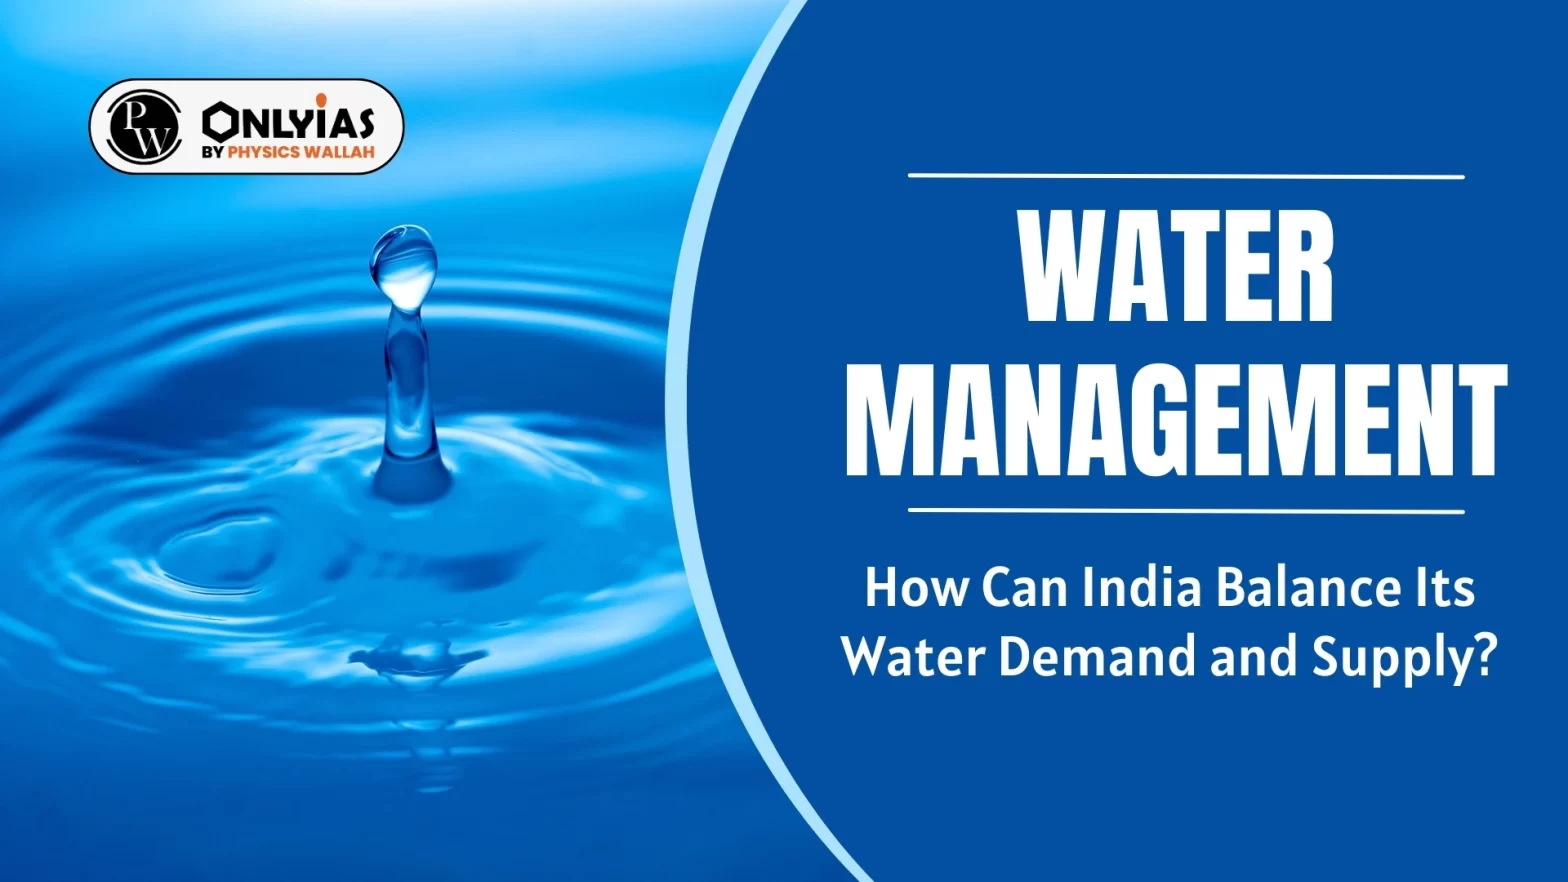 Water Management: How Can India Balance Its Water Demand and Supply?